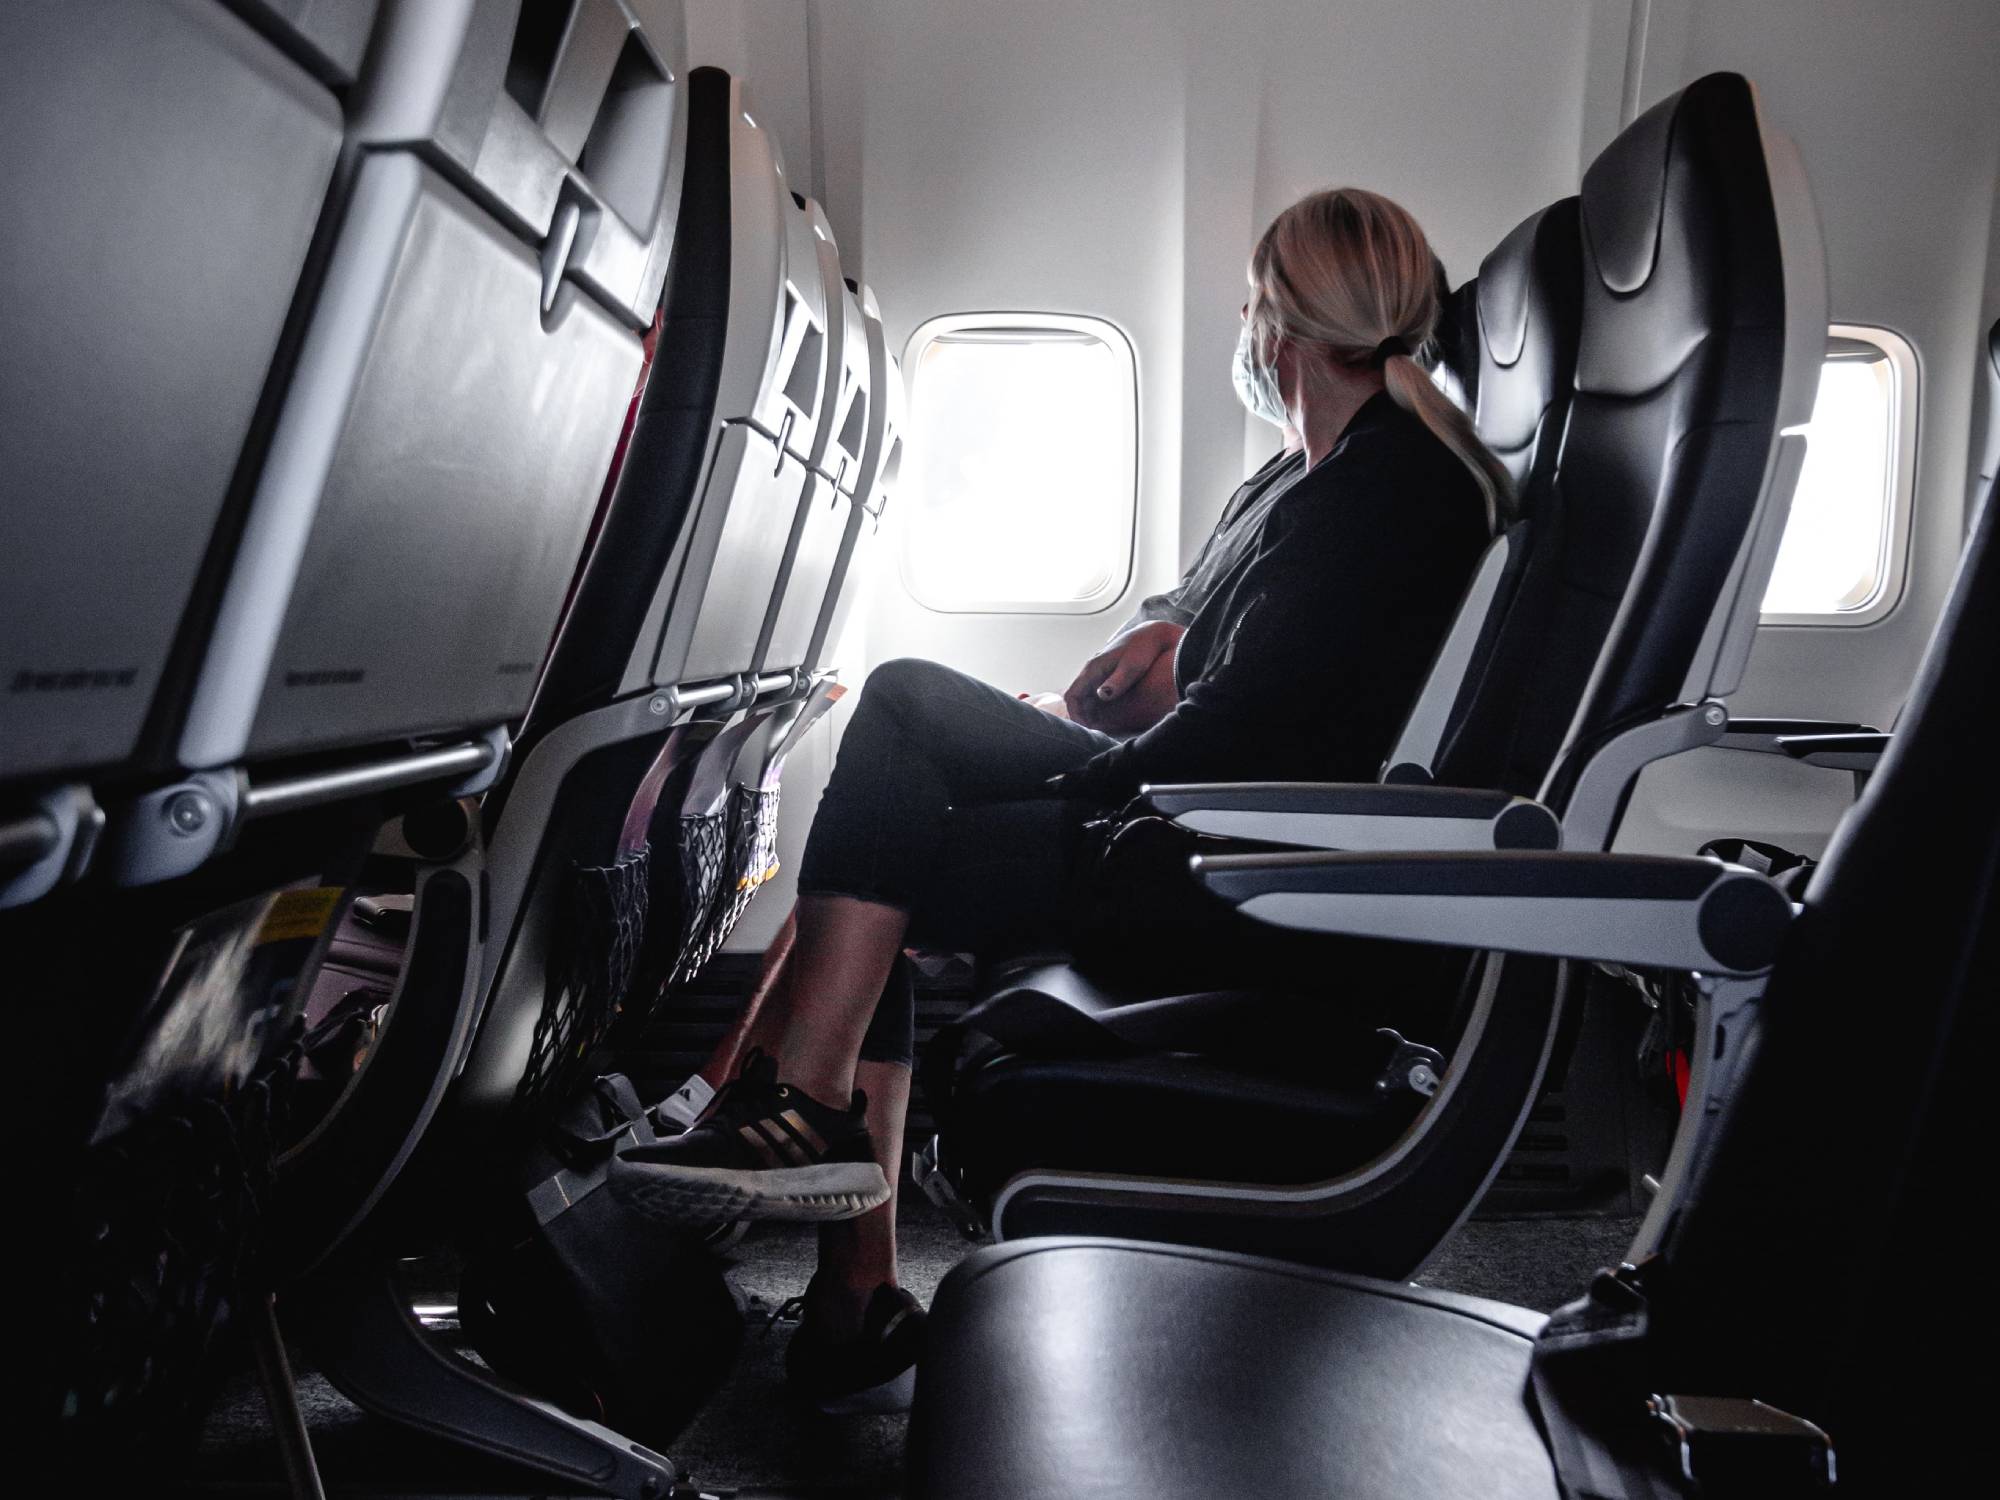 5 tips to soothe your fear of flying